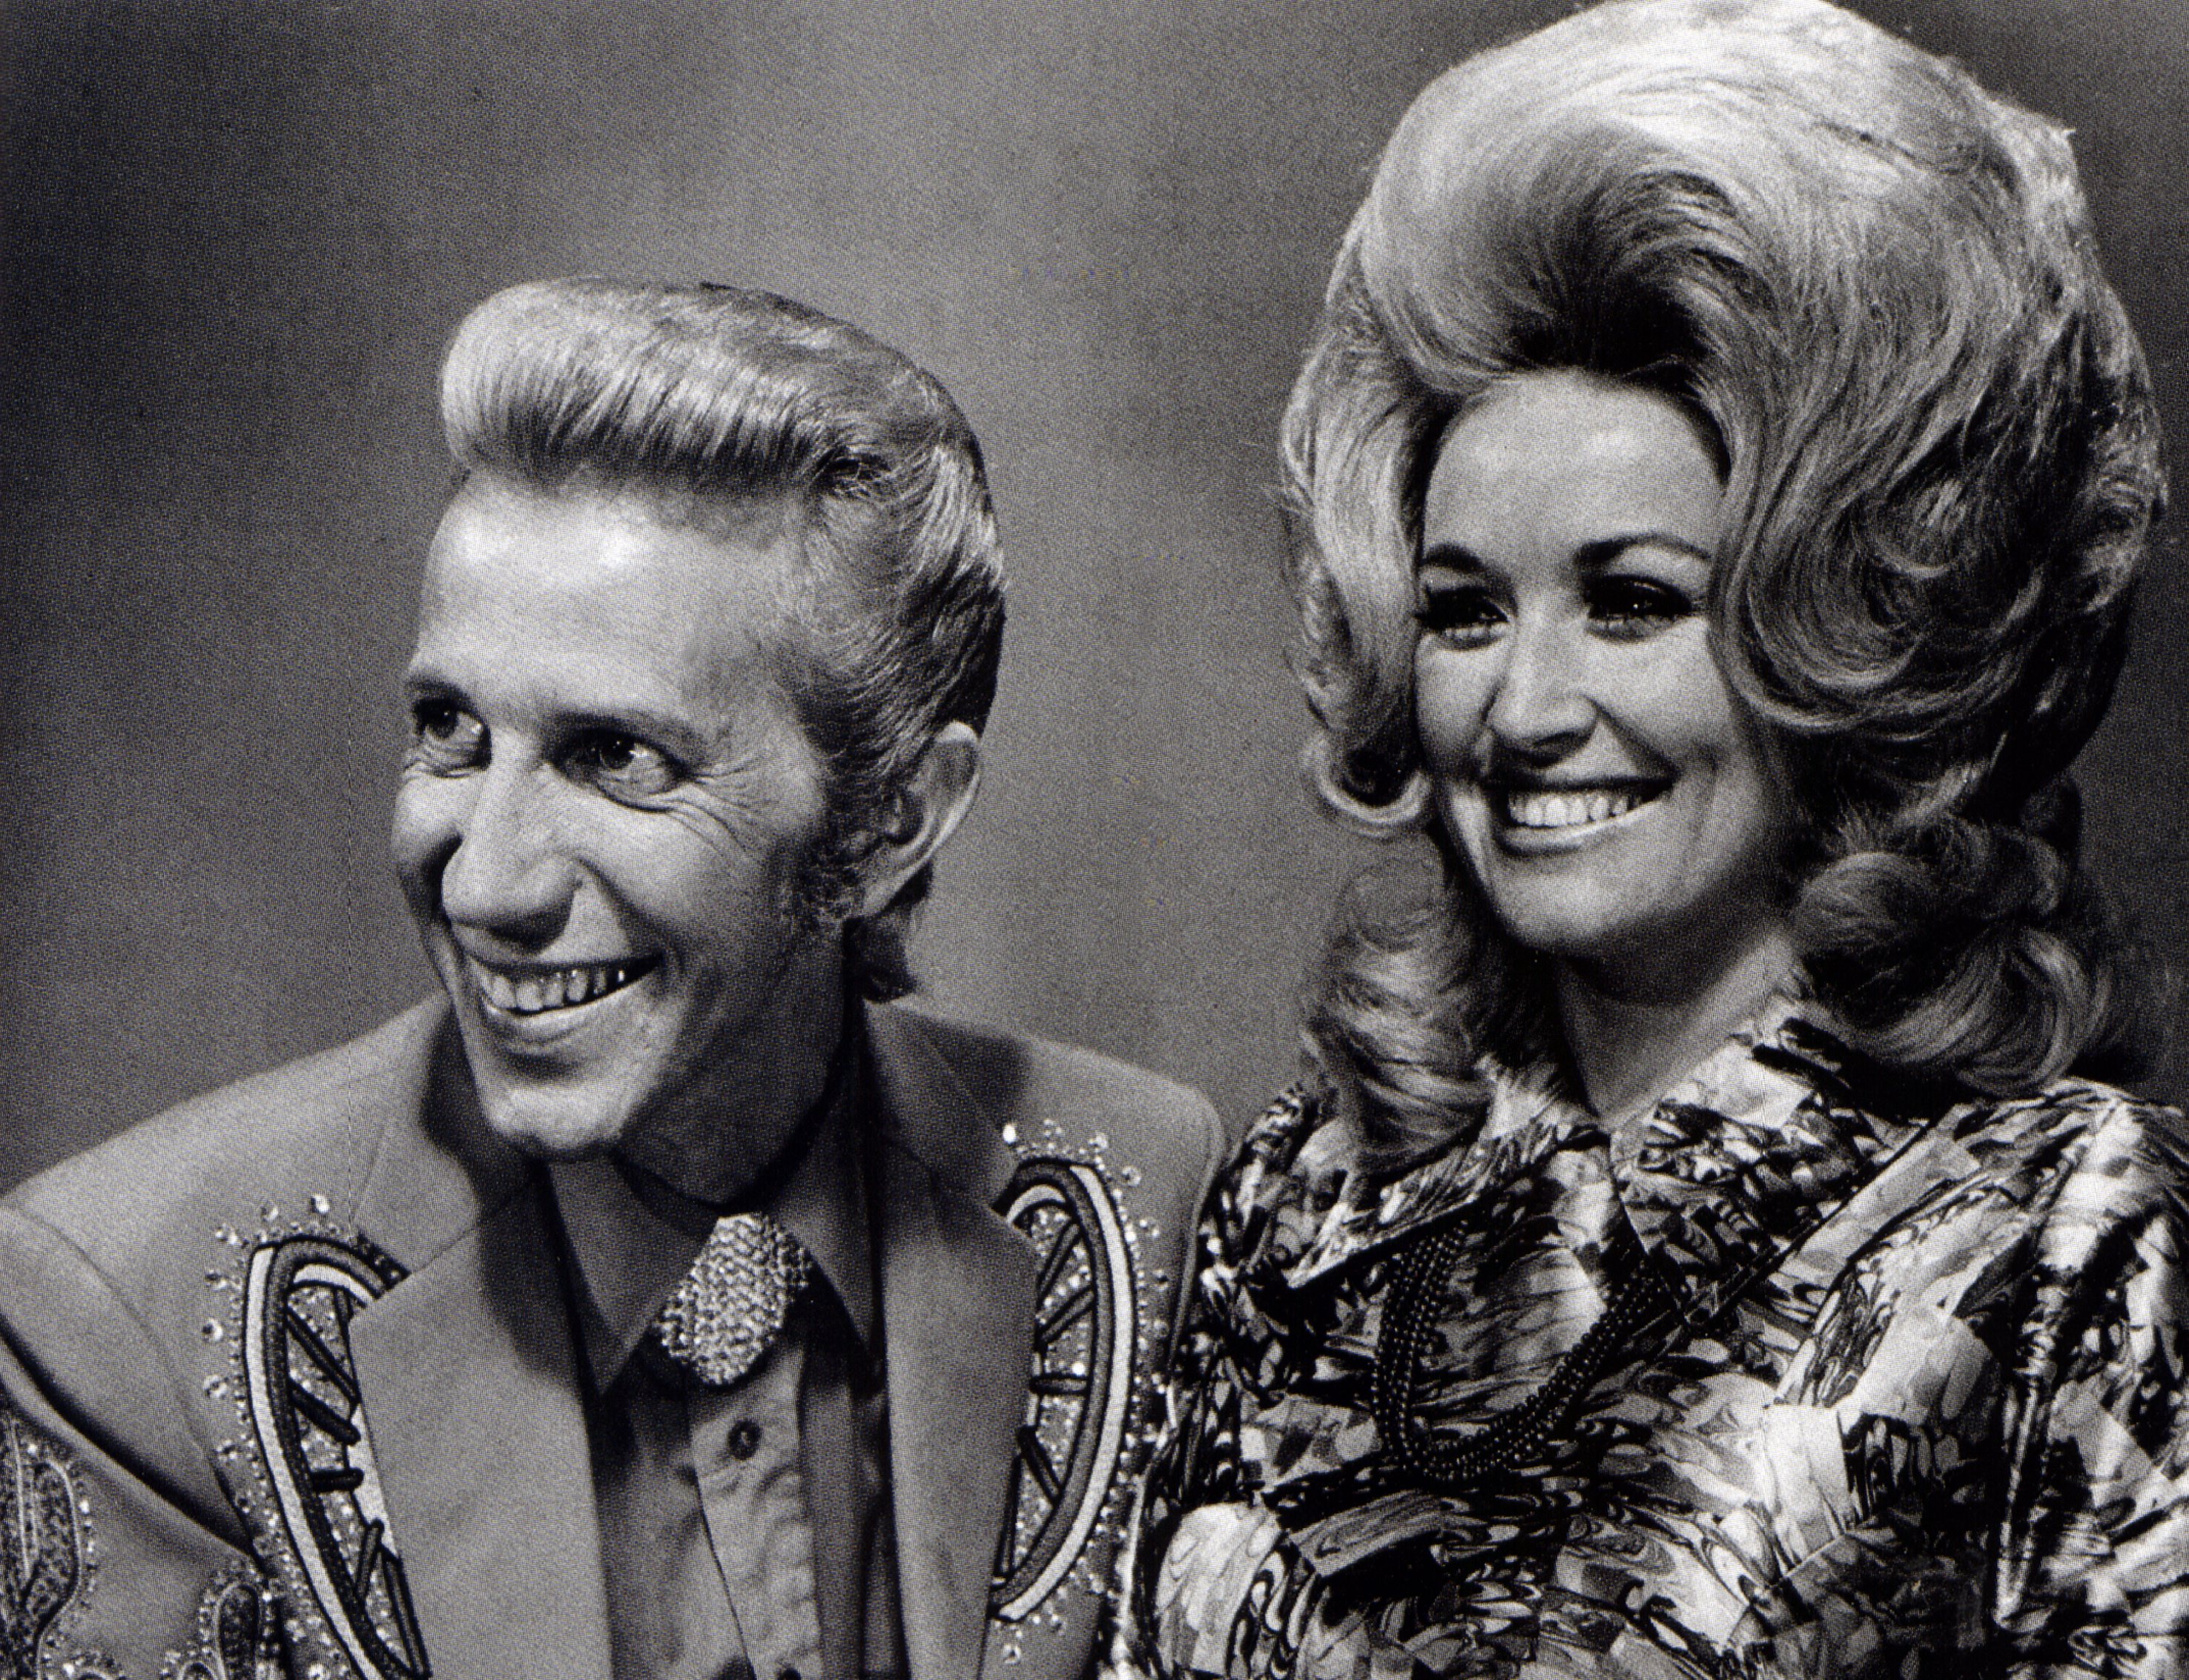 A black and white close-up of Porter Wagoner and Dolly Parton